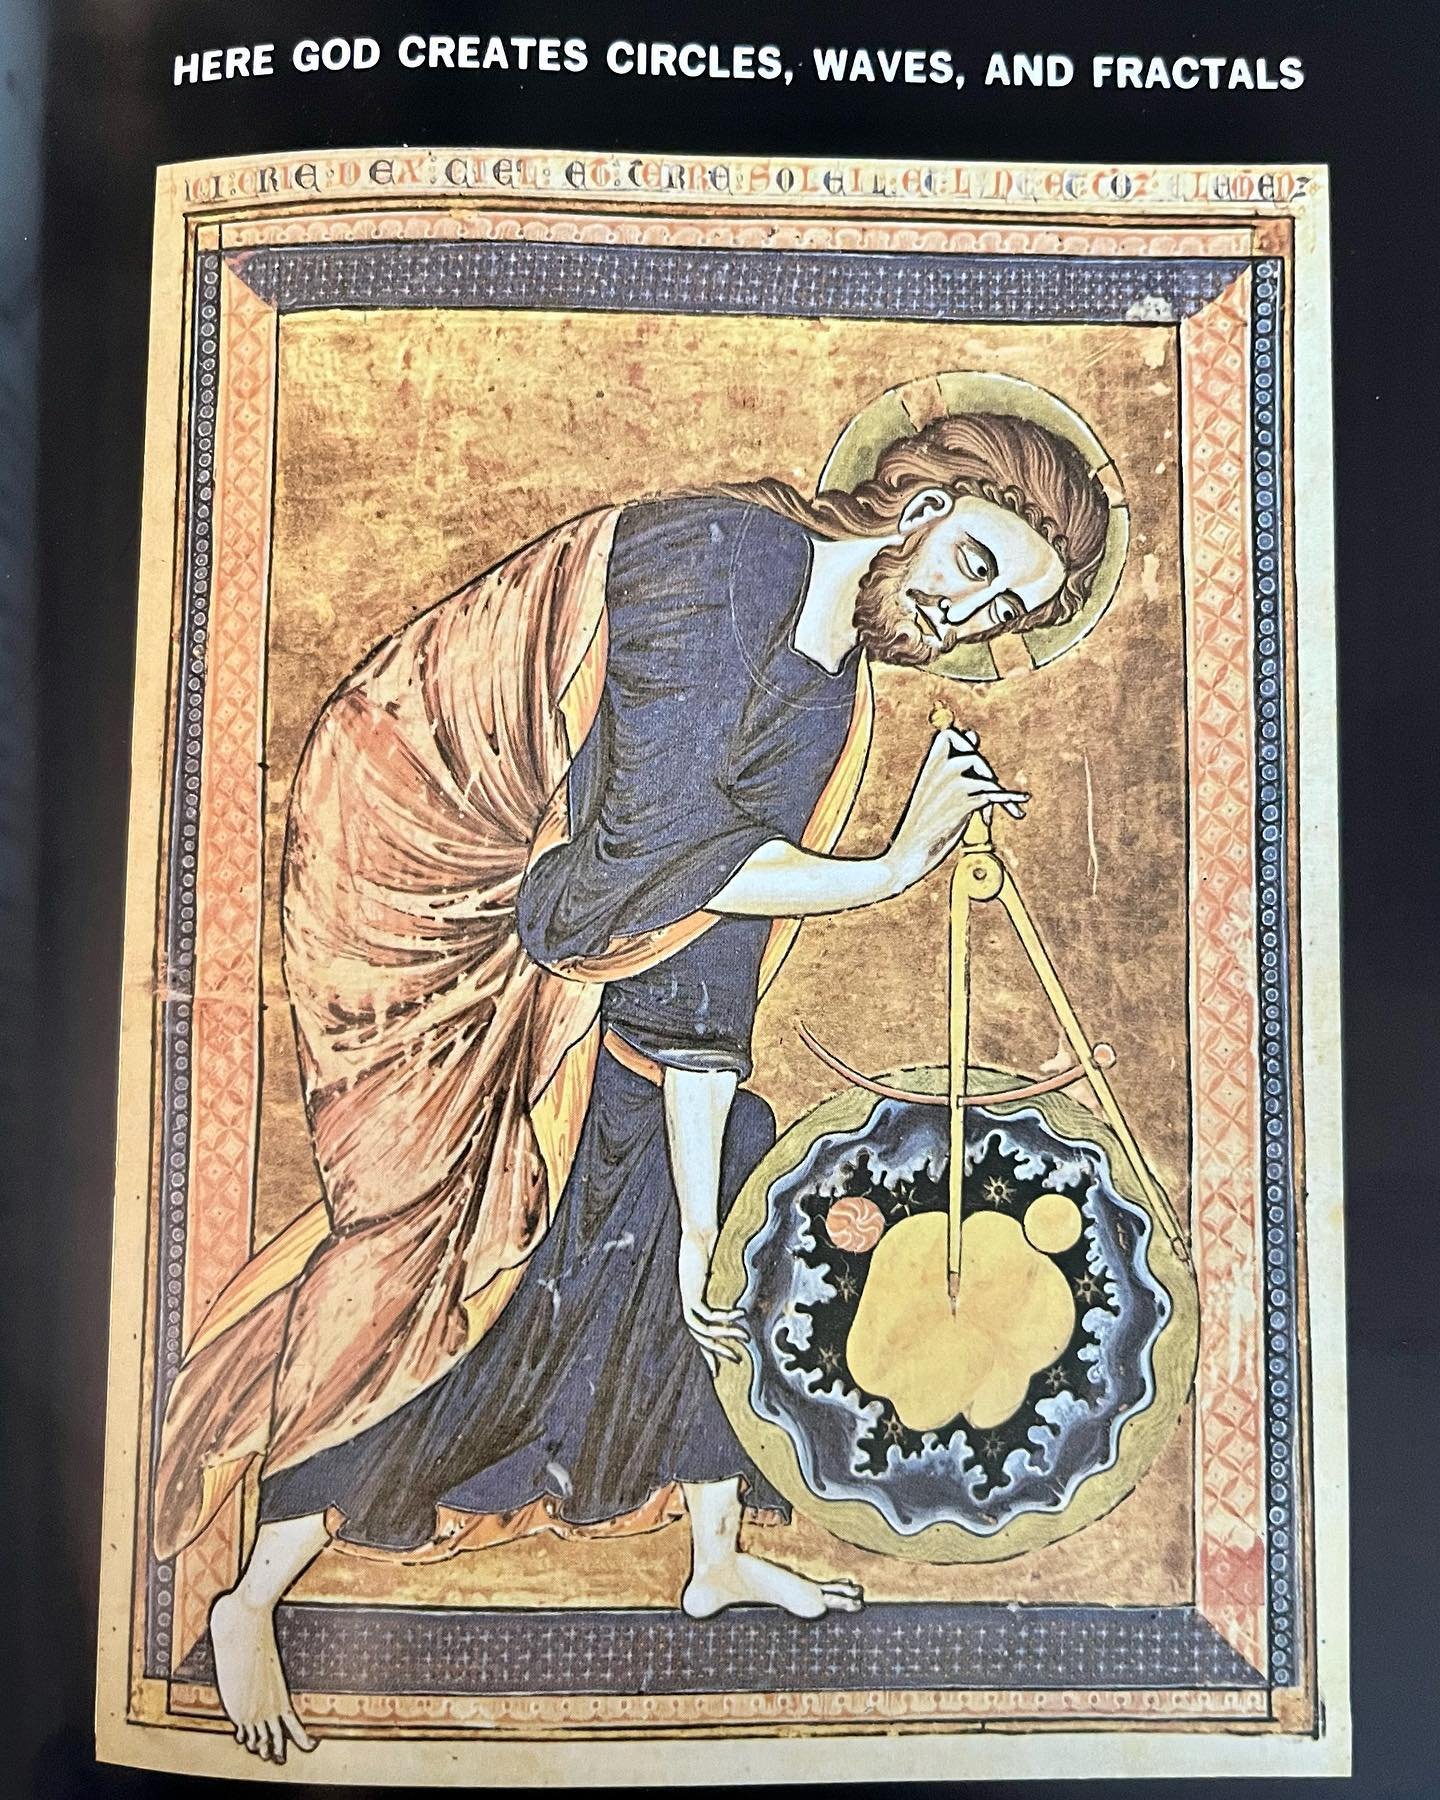 I just found this picture in a book that my mom gave to me because of my interest in sacred geometry. It&rsquo;s supposed to depict &ldquo;God&rdquo; creating circles, waves, and fractals. But to me, it looks like he&rsquo;s using a pair of jacks on 